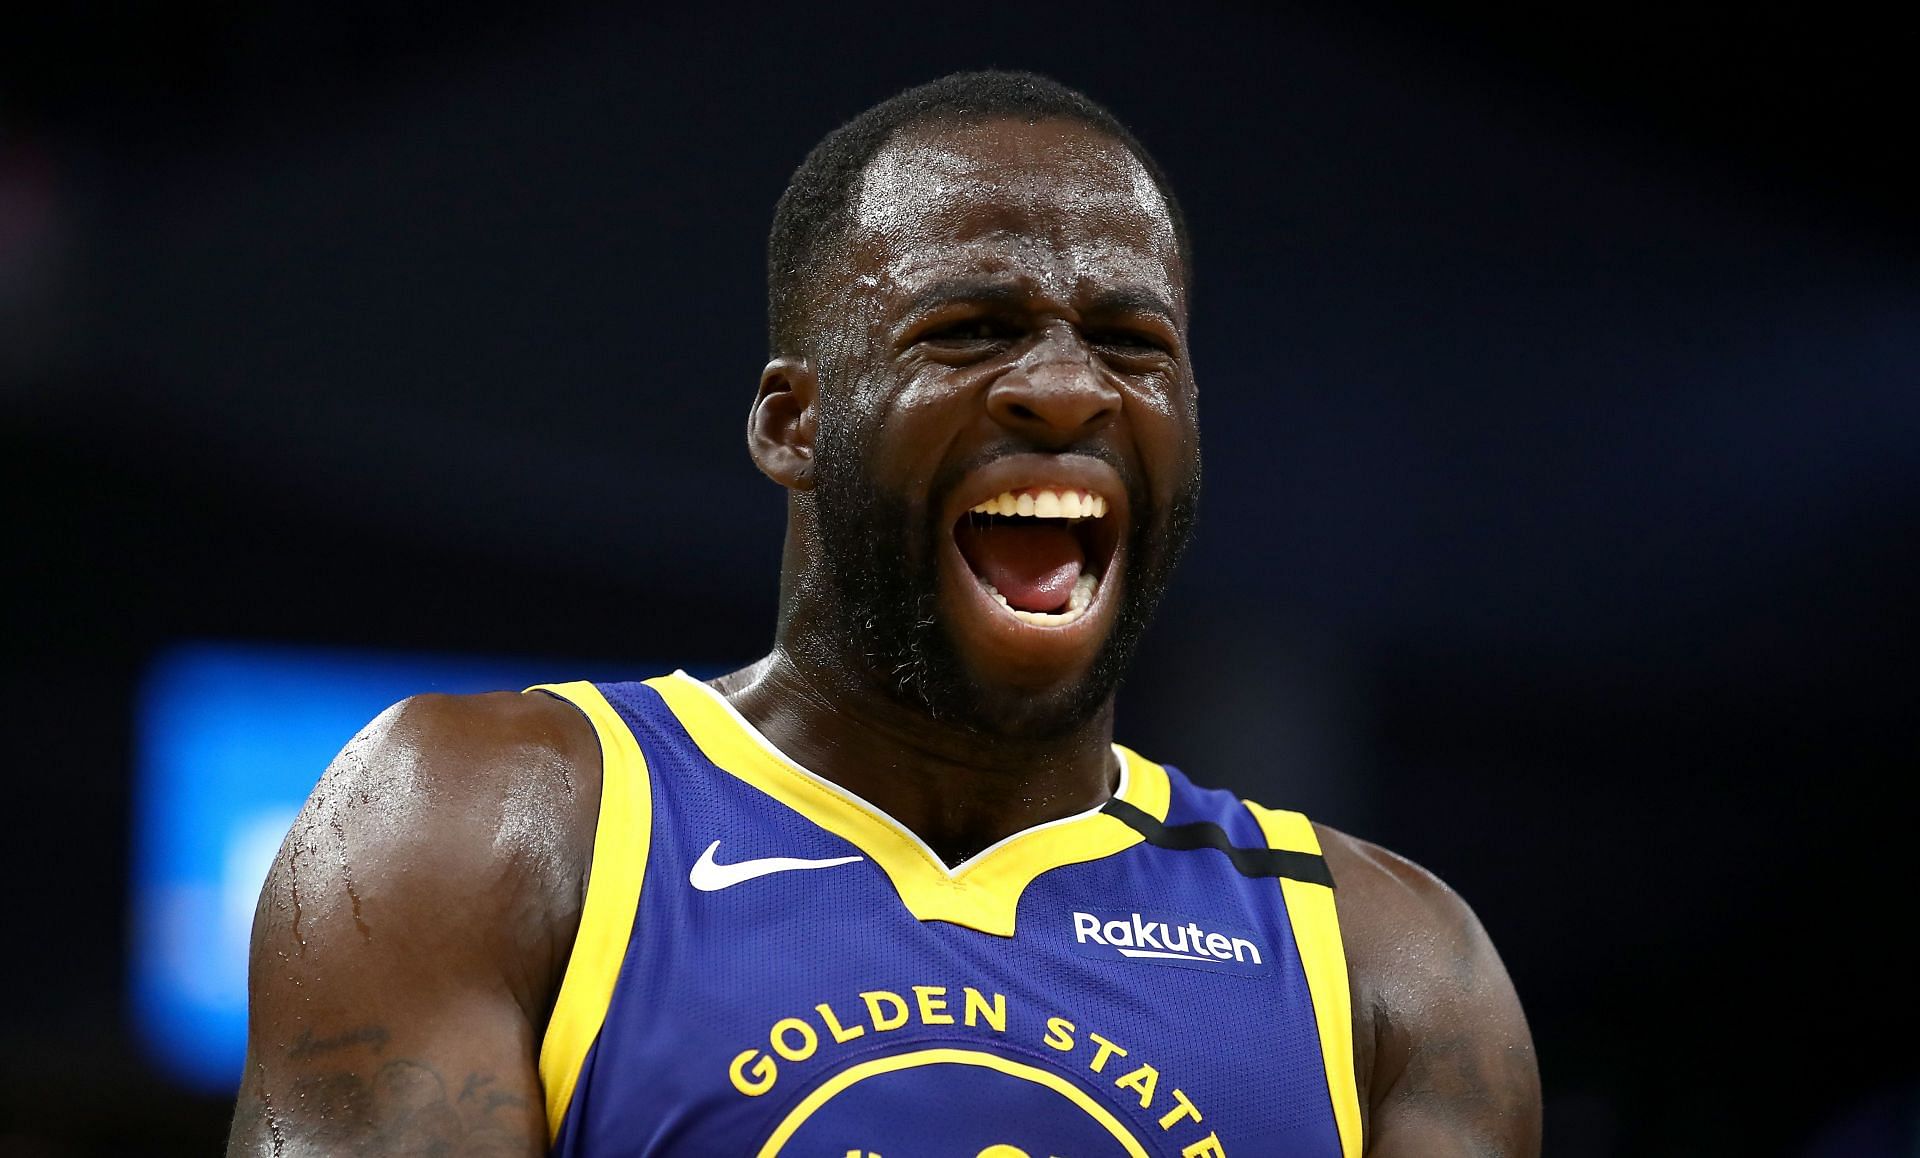 Draymond Green looks ready for success this year with the Golden State Warriors